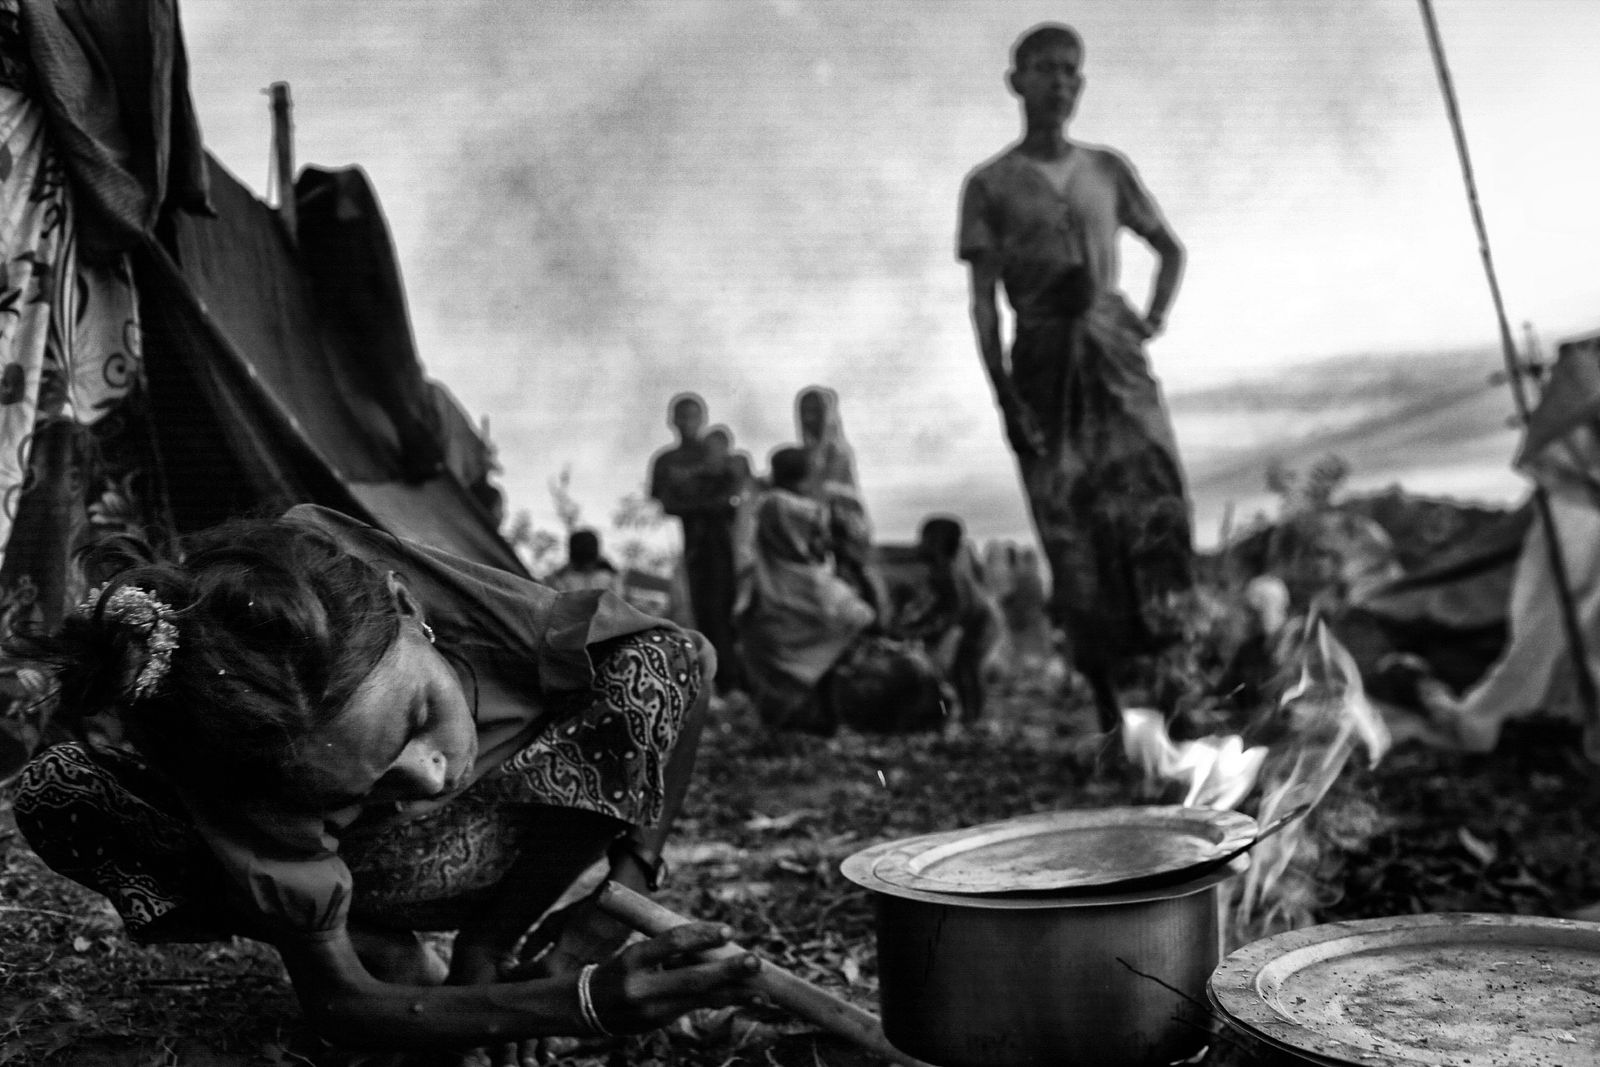 © Mohammad Rakibul Hasan - Newly arrived Rohingya refugees find their temporary shelter on a mountain in Bangladesh.